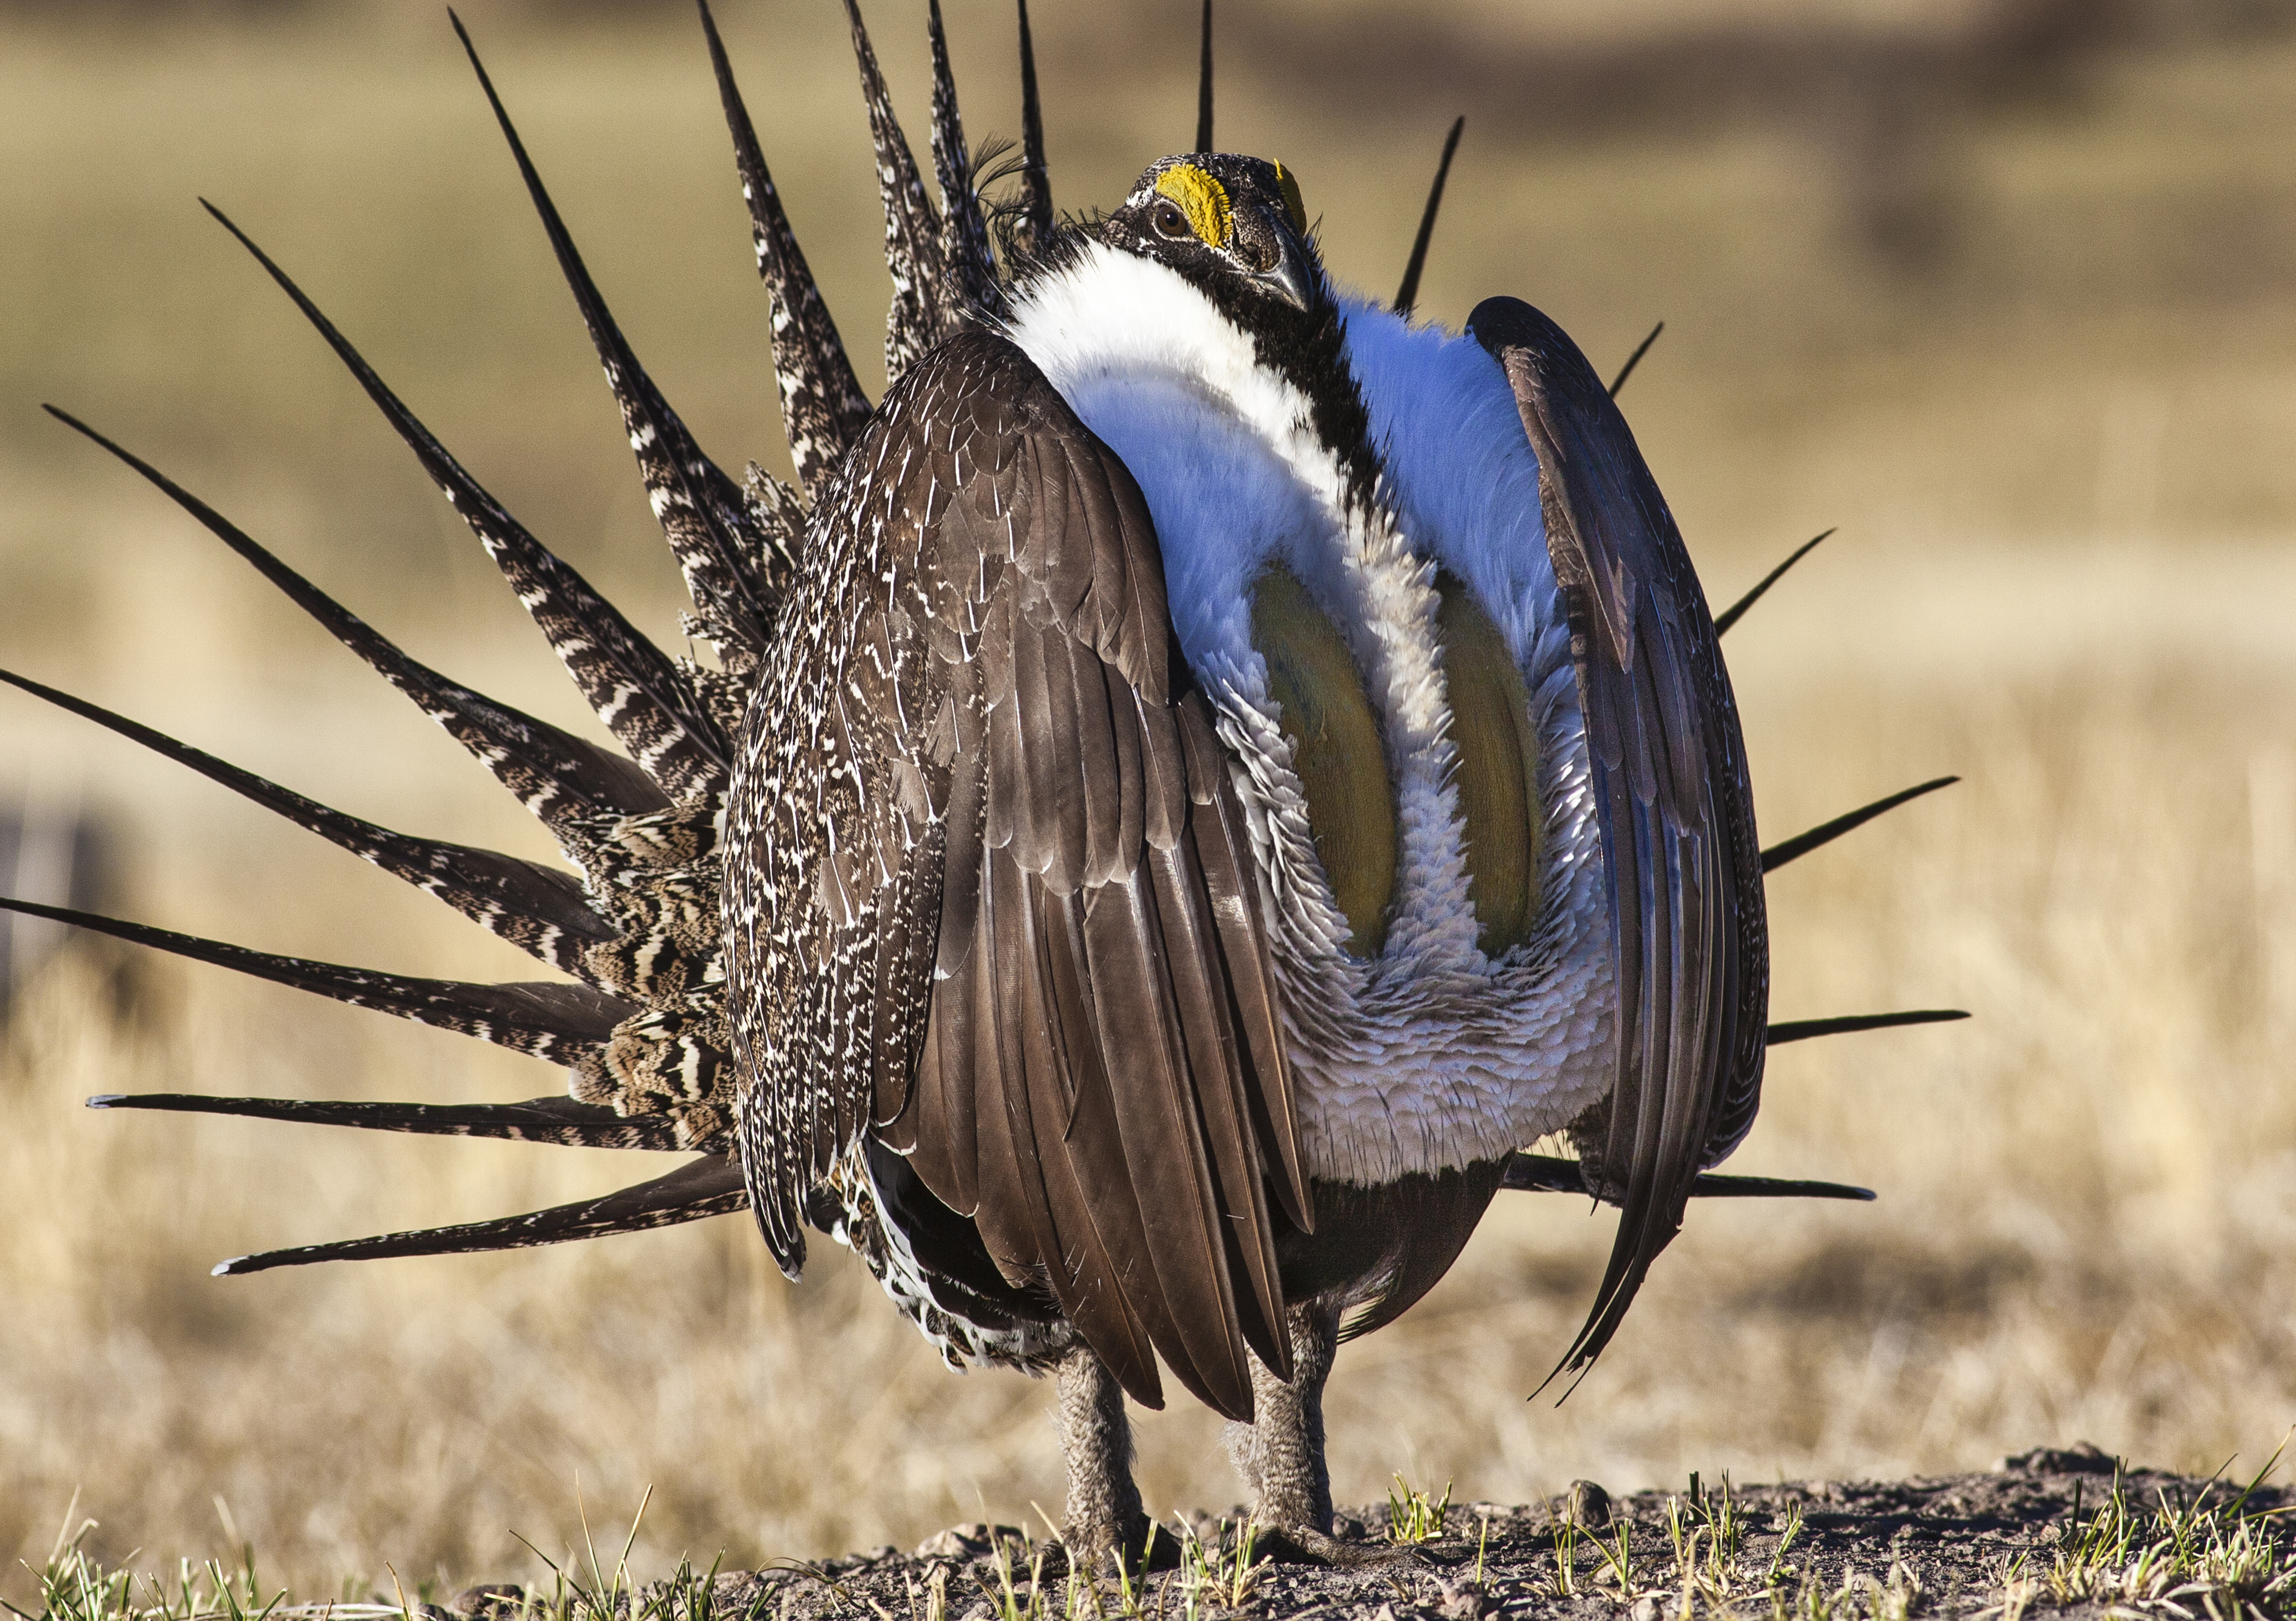 U.S. Bureau of Land Management photo shows a sage grouse in this undated photo. President Barack Obama's administration plans to protect the greater sage grouse in the western United States by limiting oil and gas development and renewable energy in the bird's habitat, under a federal plan released on May 28, 2015. REUTERS/Bob Wick/BLM